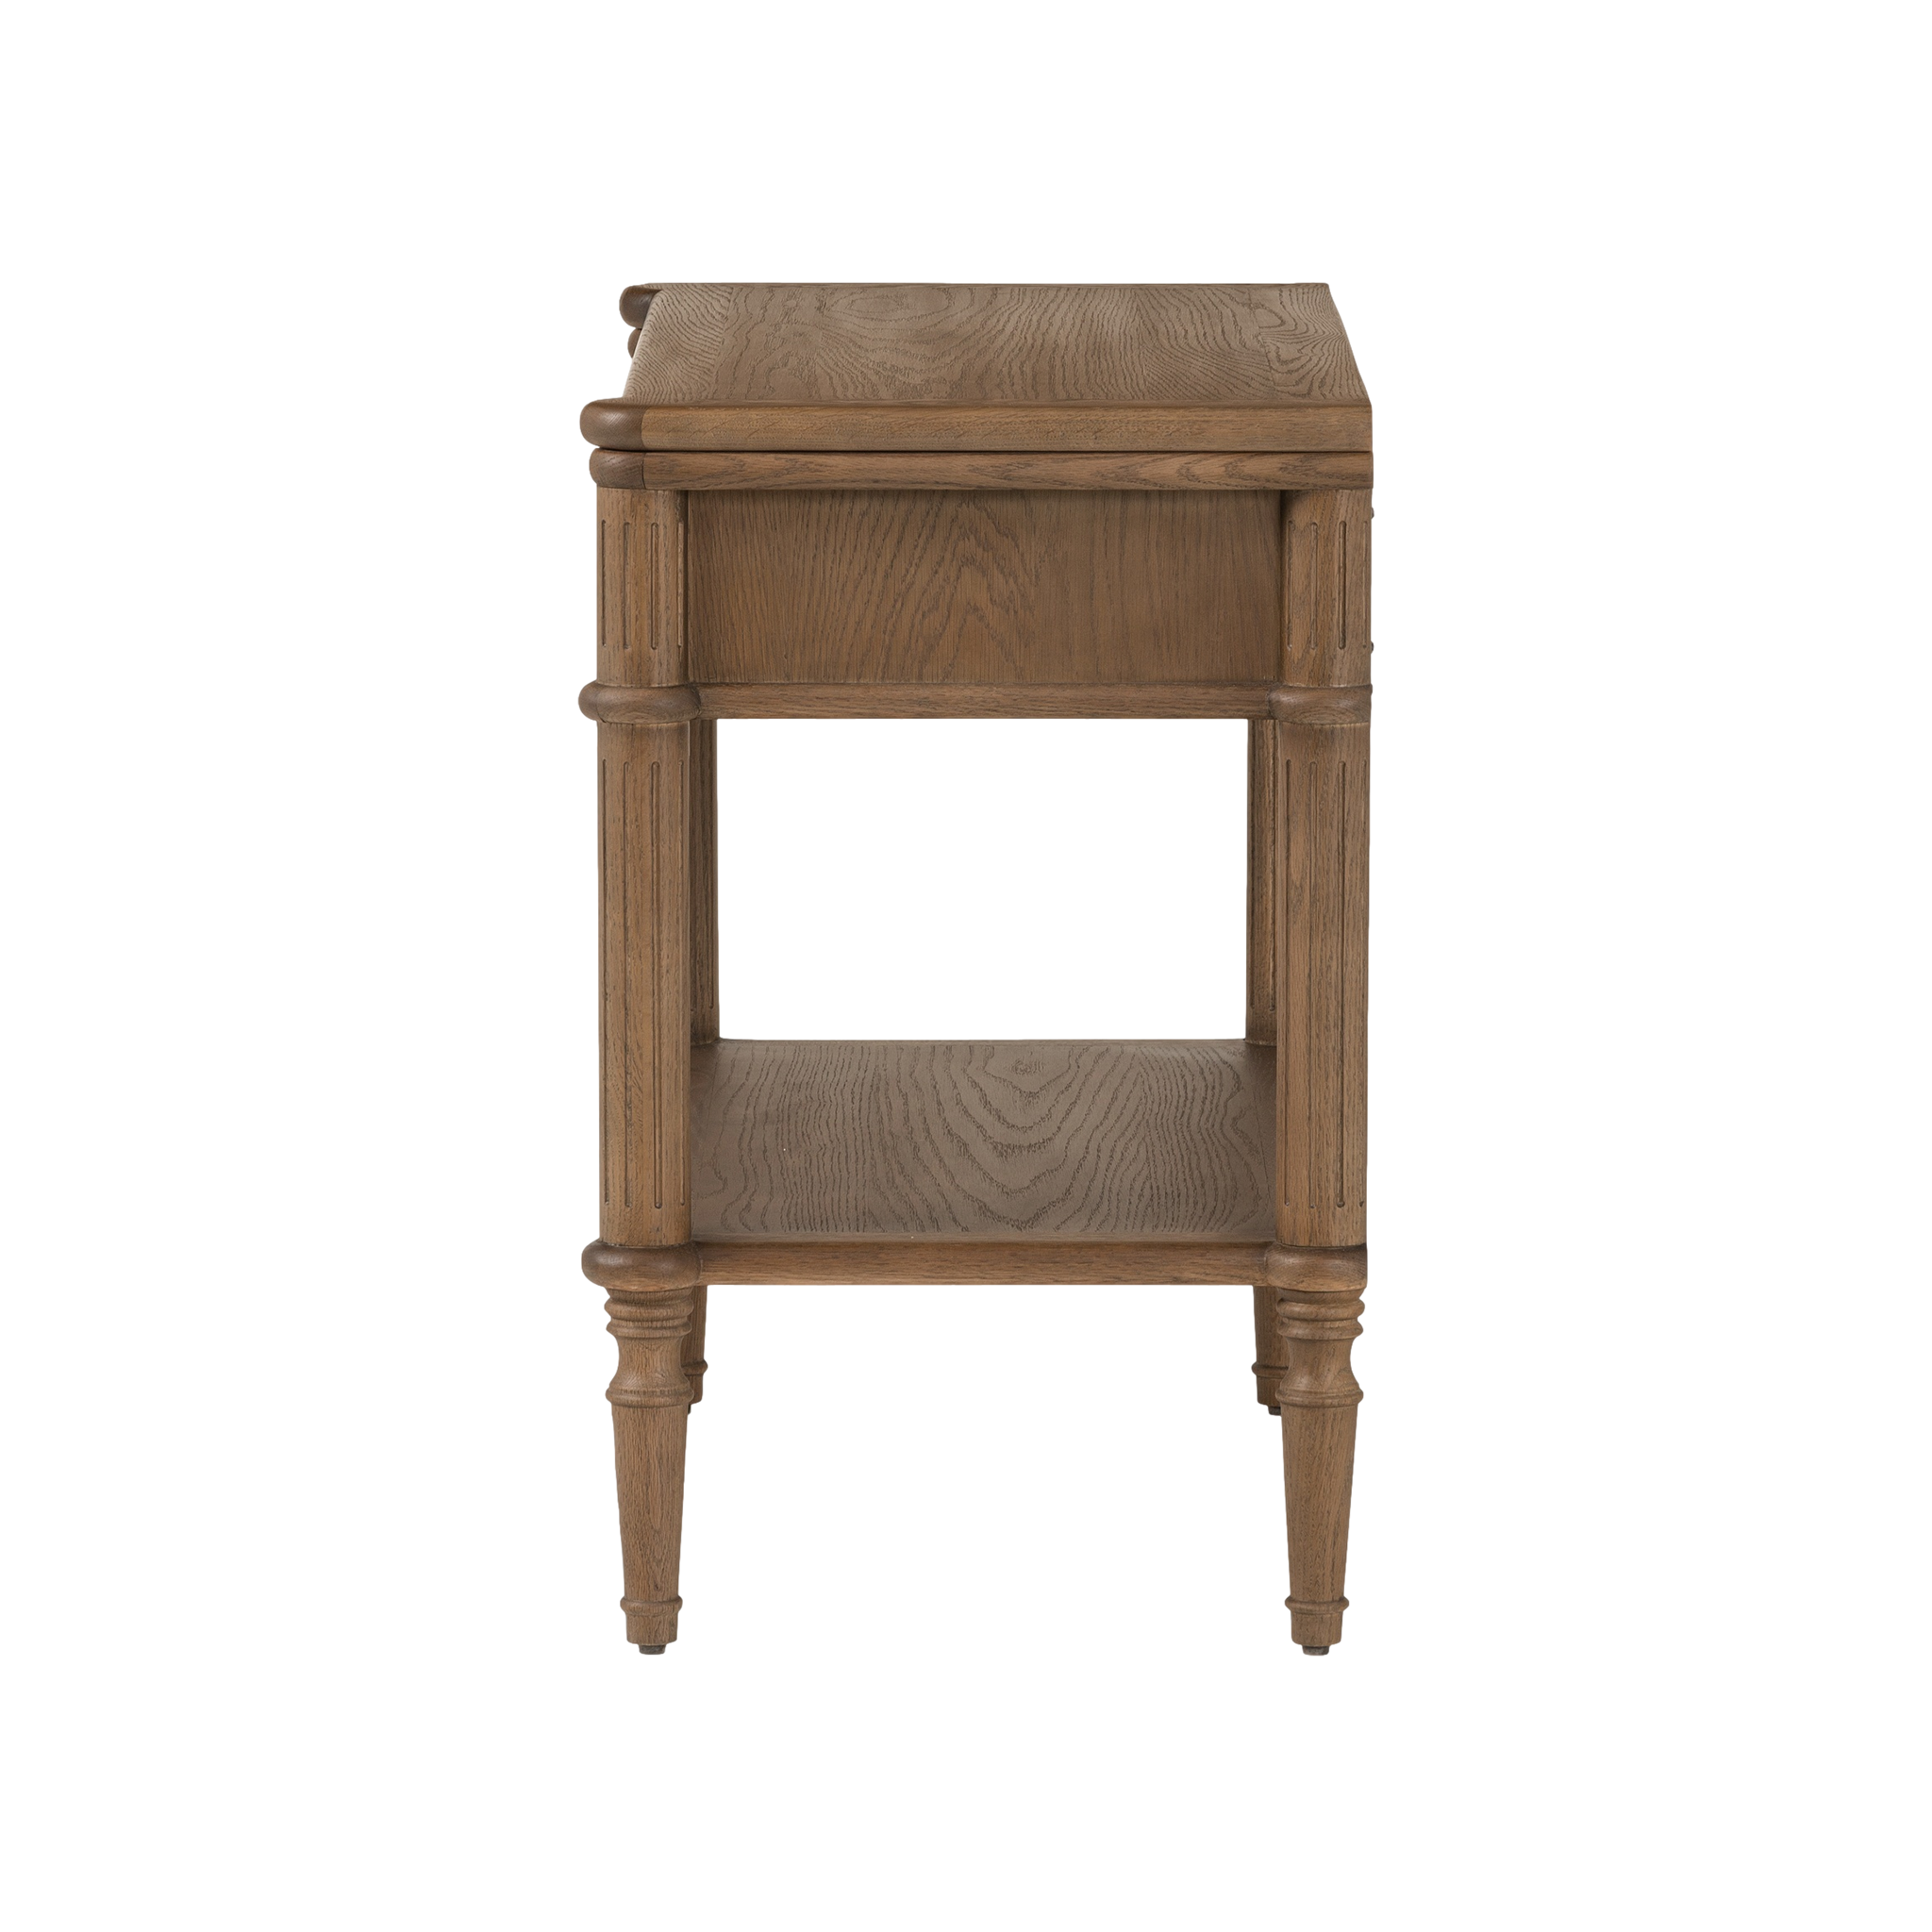 Toulouse Nightstand in Toasted Oak